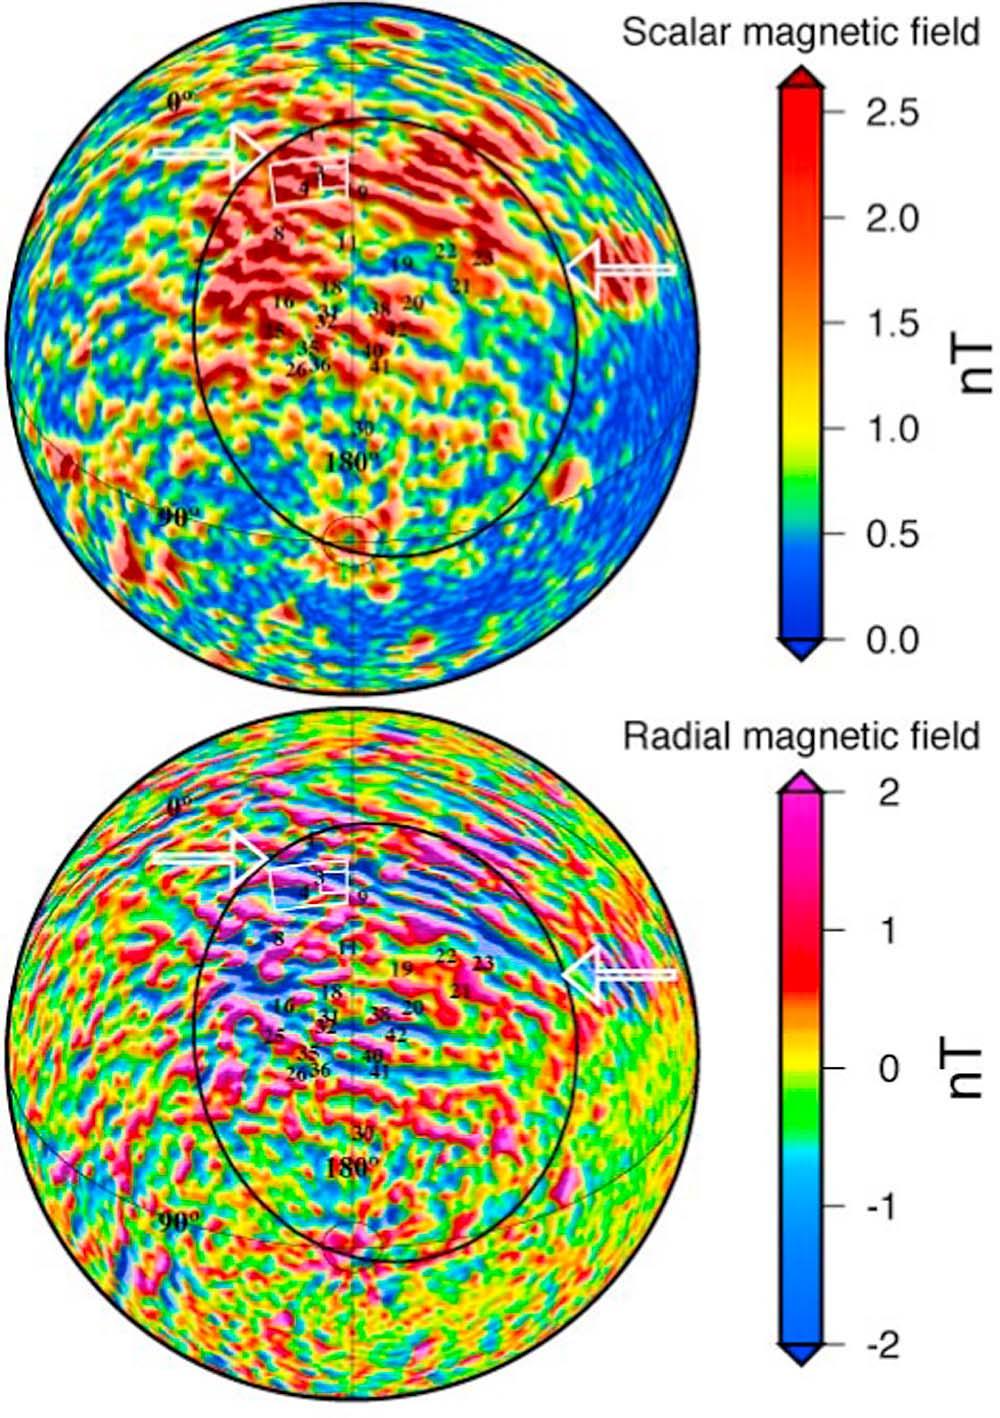 magnetometer observations are used here. The first model adopts a sequential approach to the modeling of the external and internal magnetic fields, and best preserves original signal amplitudes.